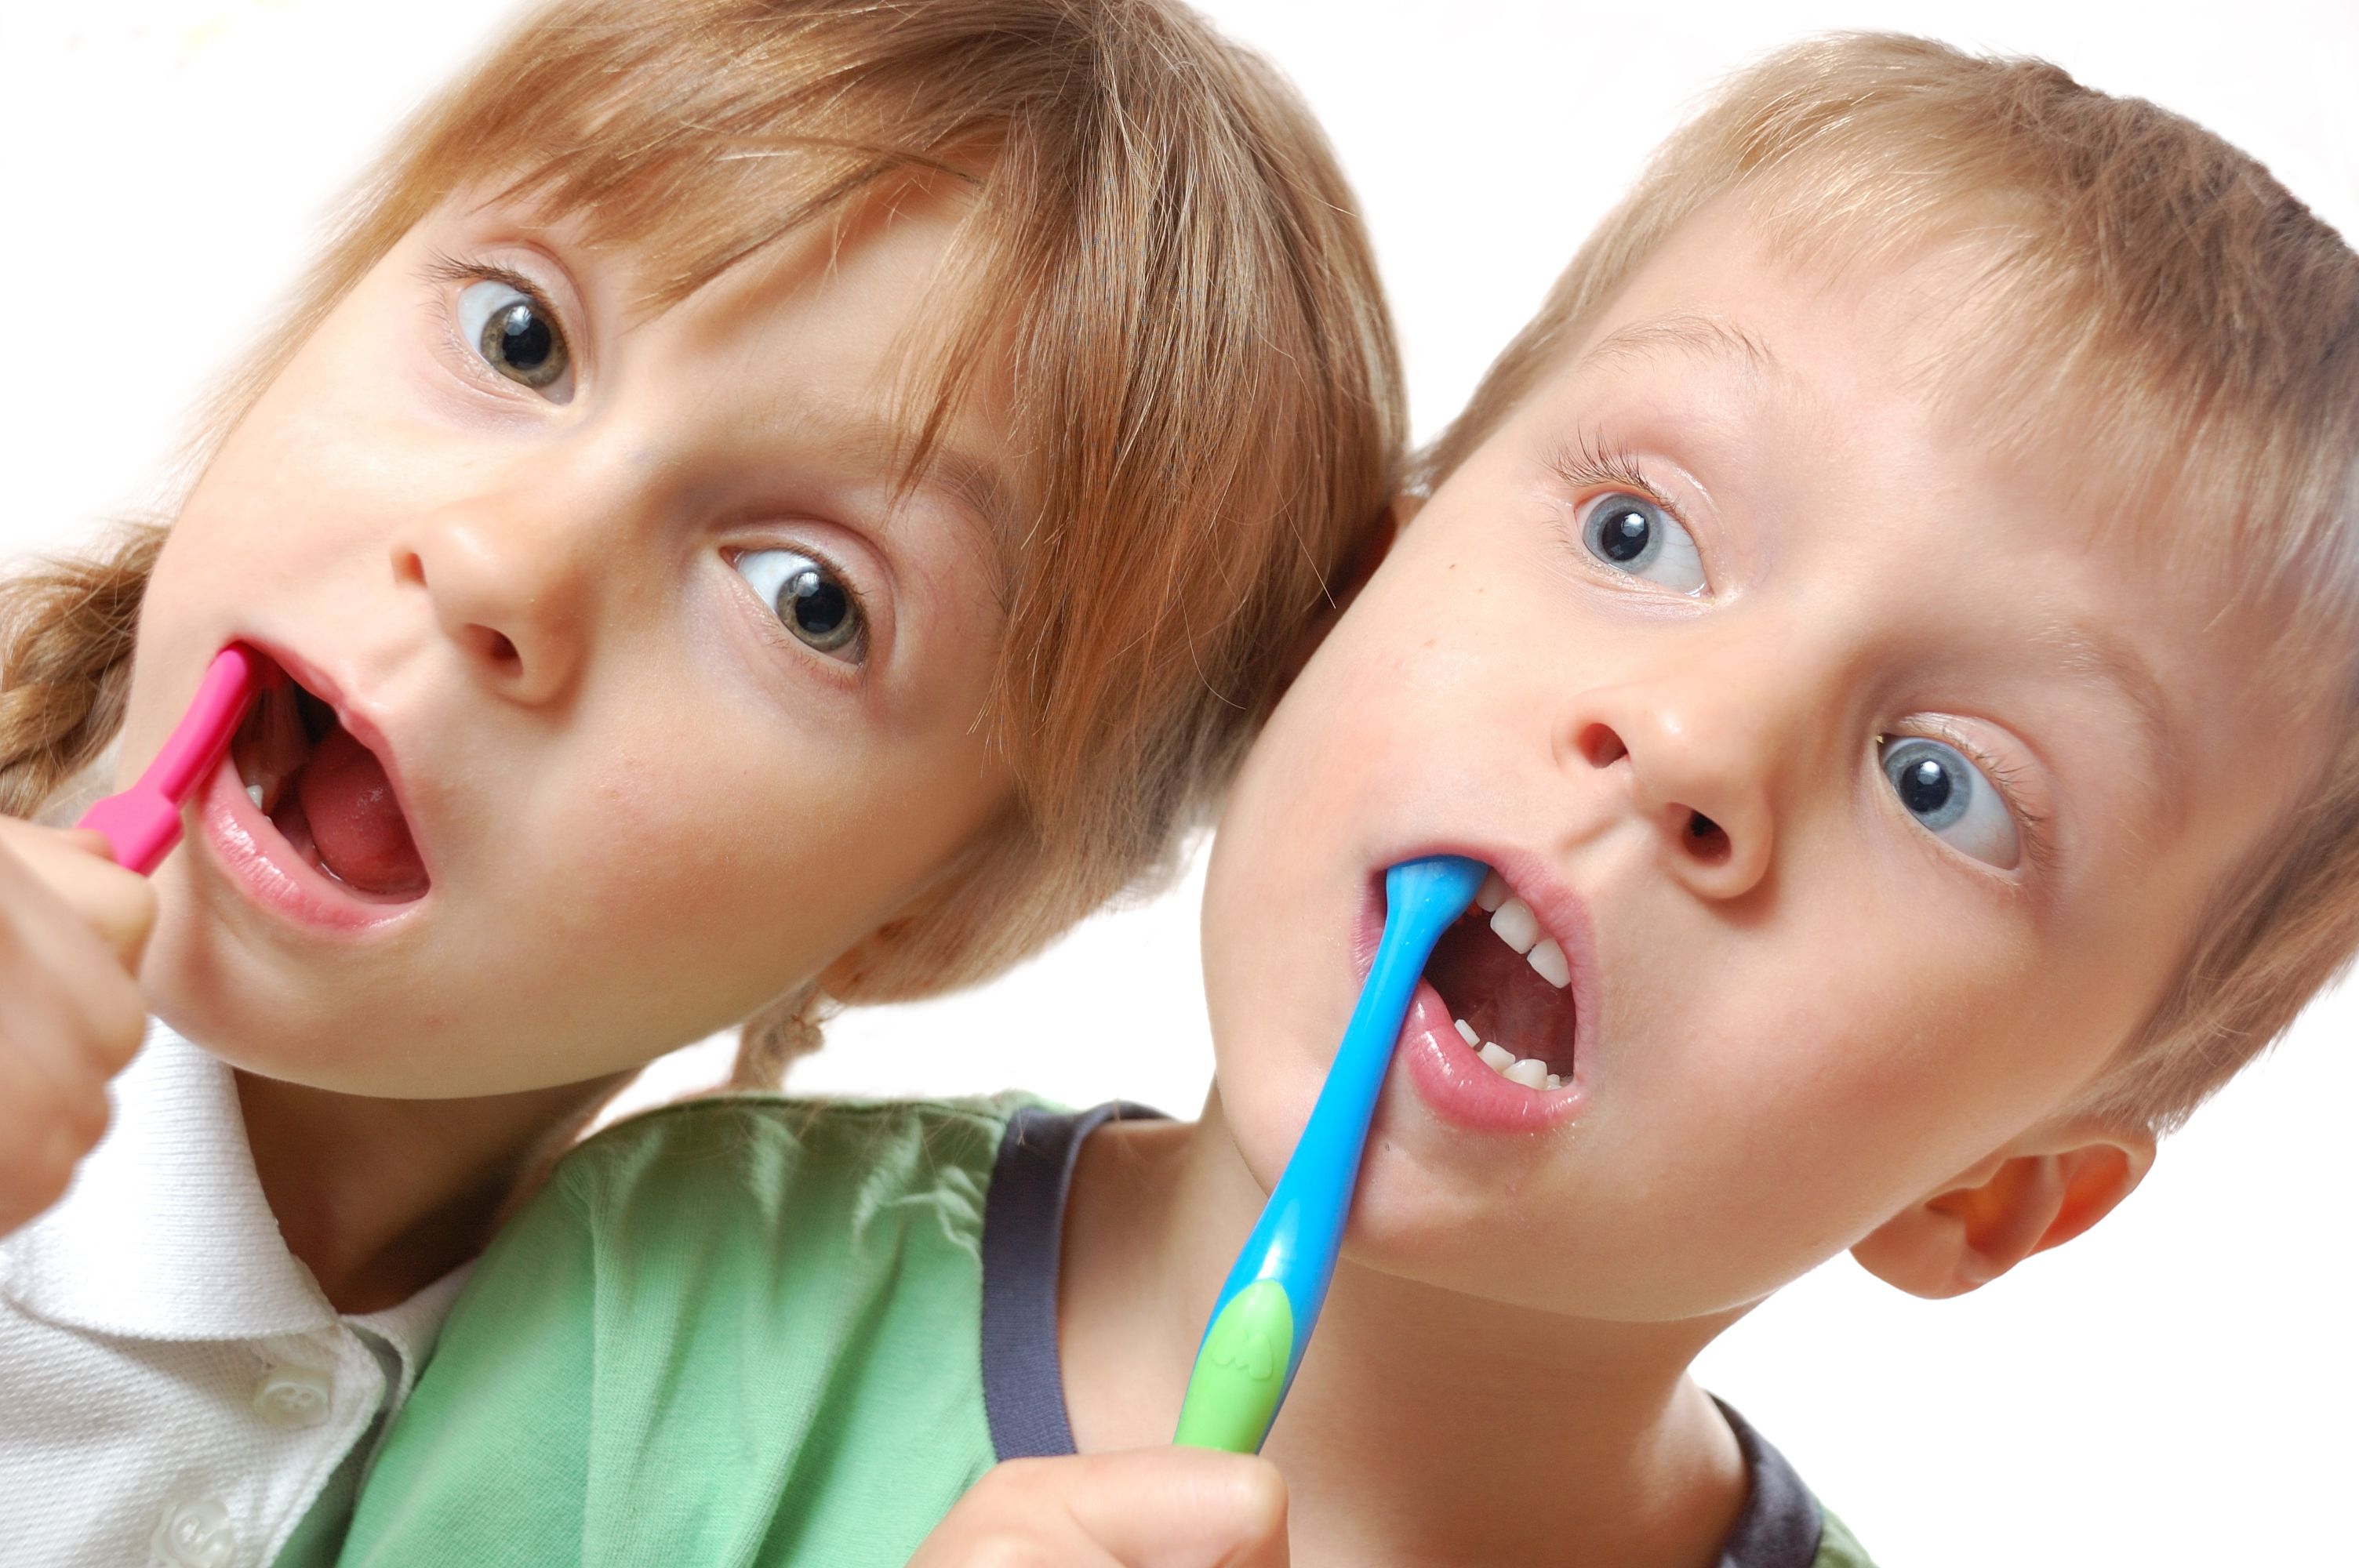 Where can I find a Children's Dentist in Baltimore?